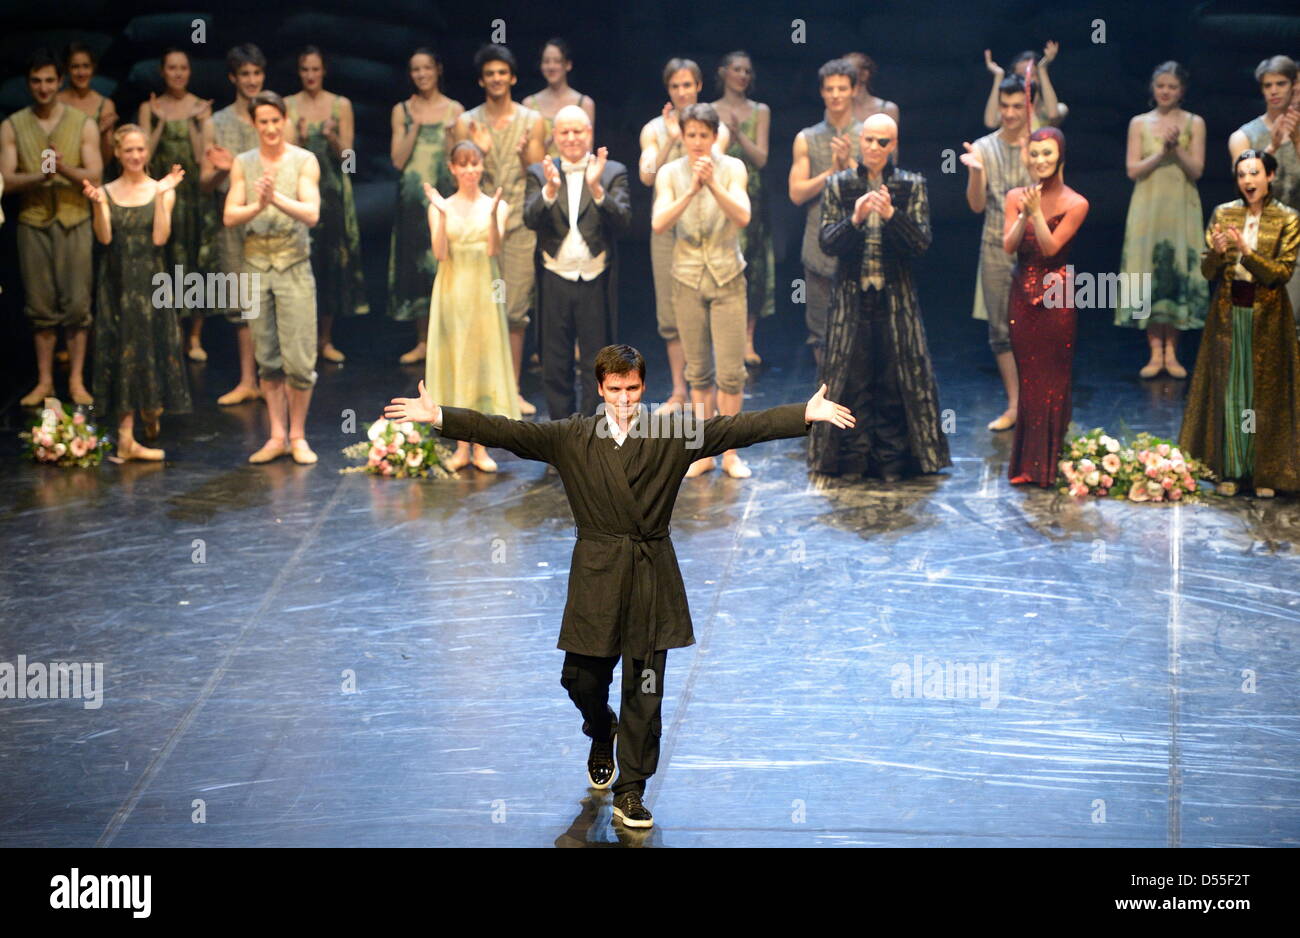 HANDOUT - A handout picture shows choreographer Demis Volpi (C) standing with other members of the ensemble of Stuttgart Ballet after the premiere of the new ballet Krabat at the opera house in Stuttgart, Germany, 22 March 2013. Demis Volpi was asked to be house choreographer after the premiere at the Stuttgart Ballet. Photo: Stuttgarter Ballett Stock Photo